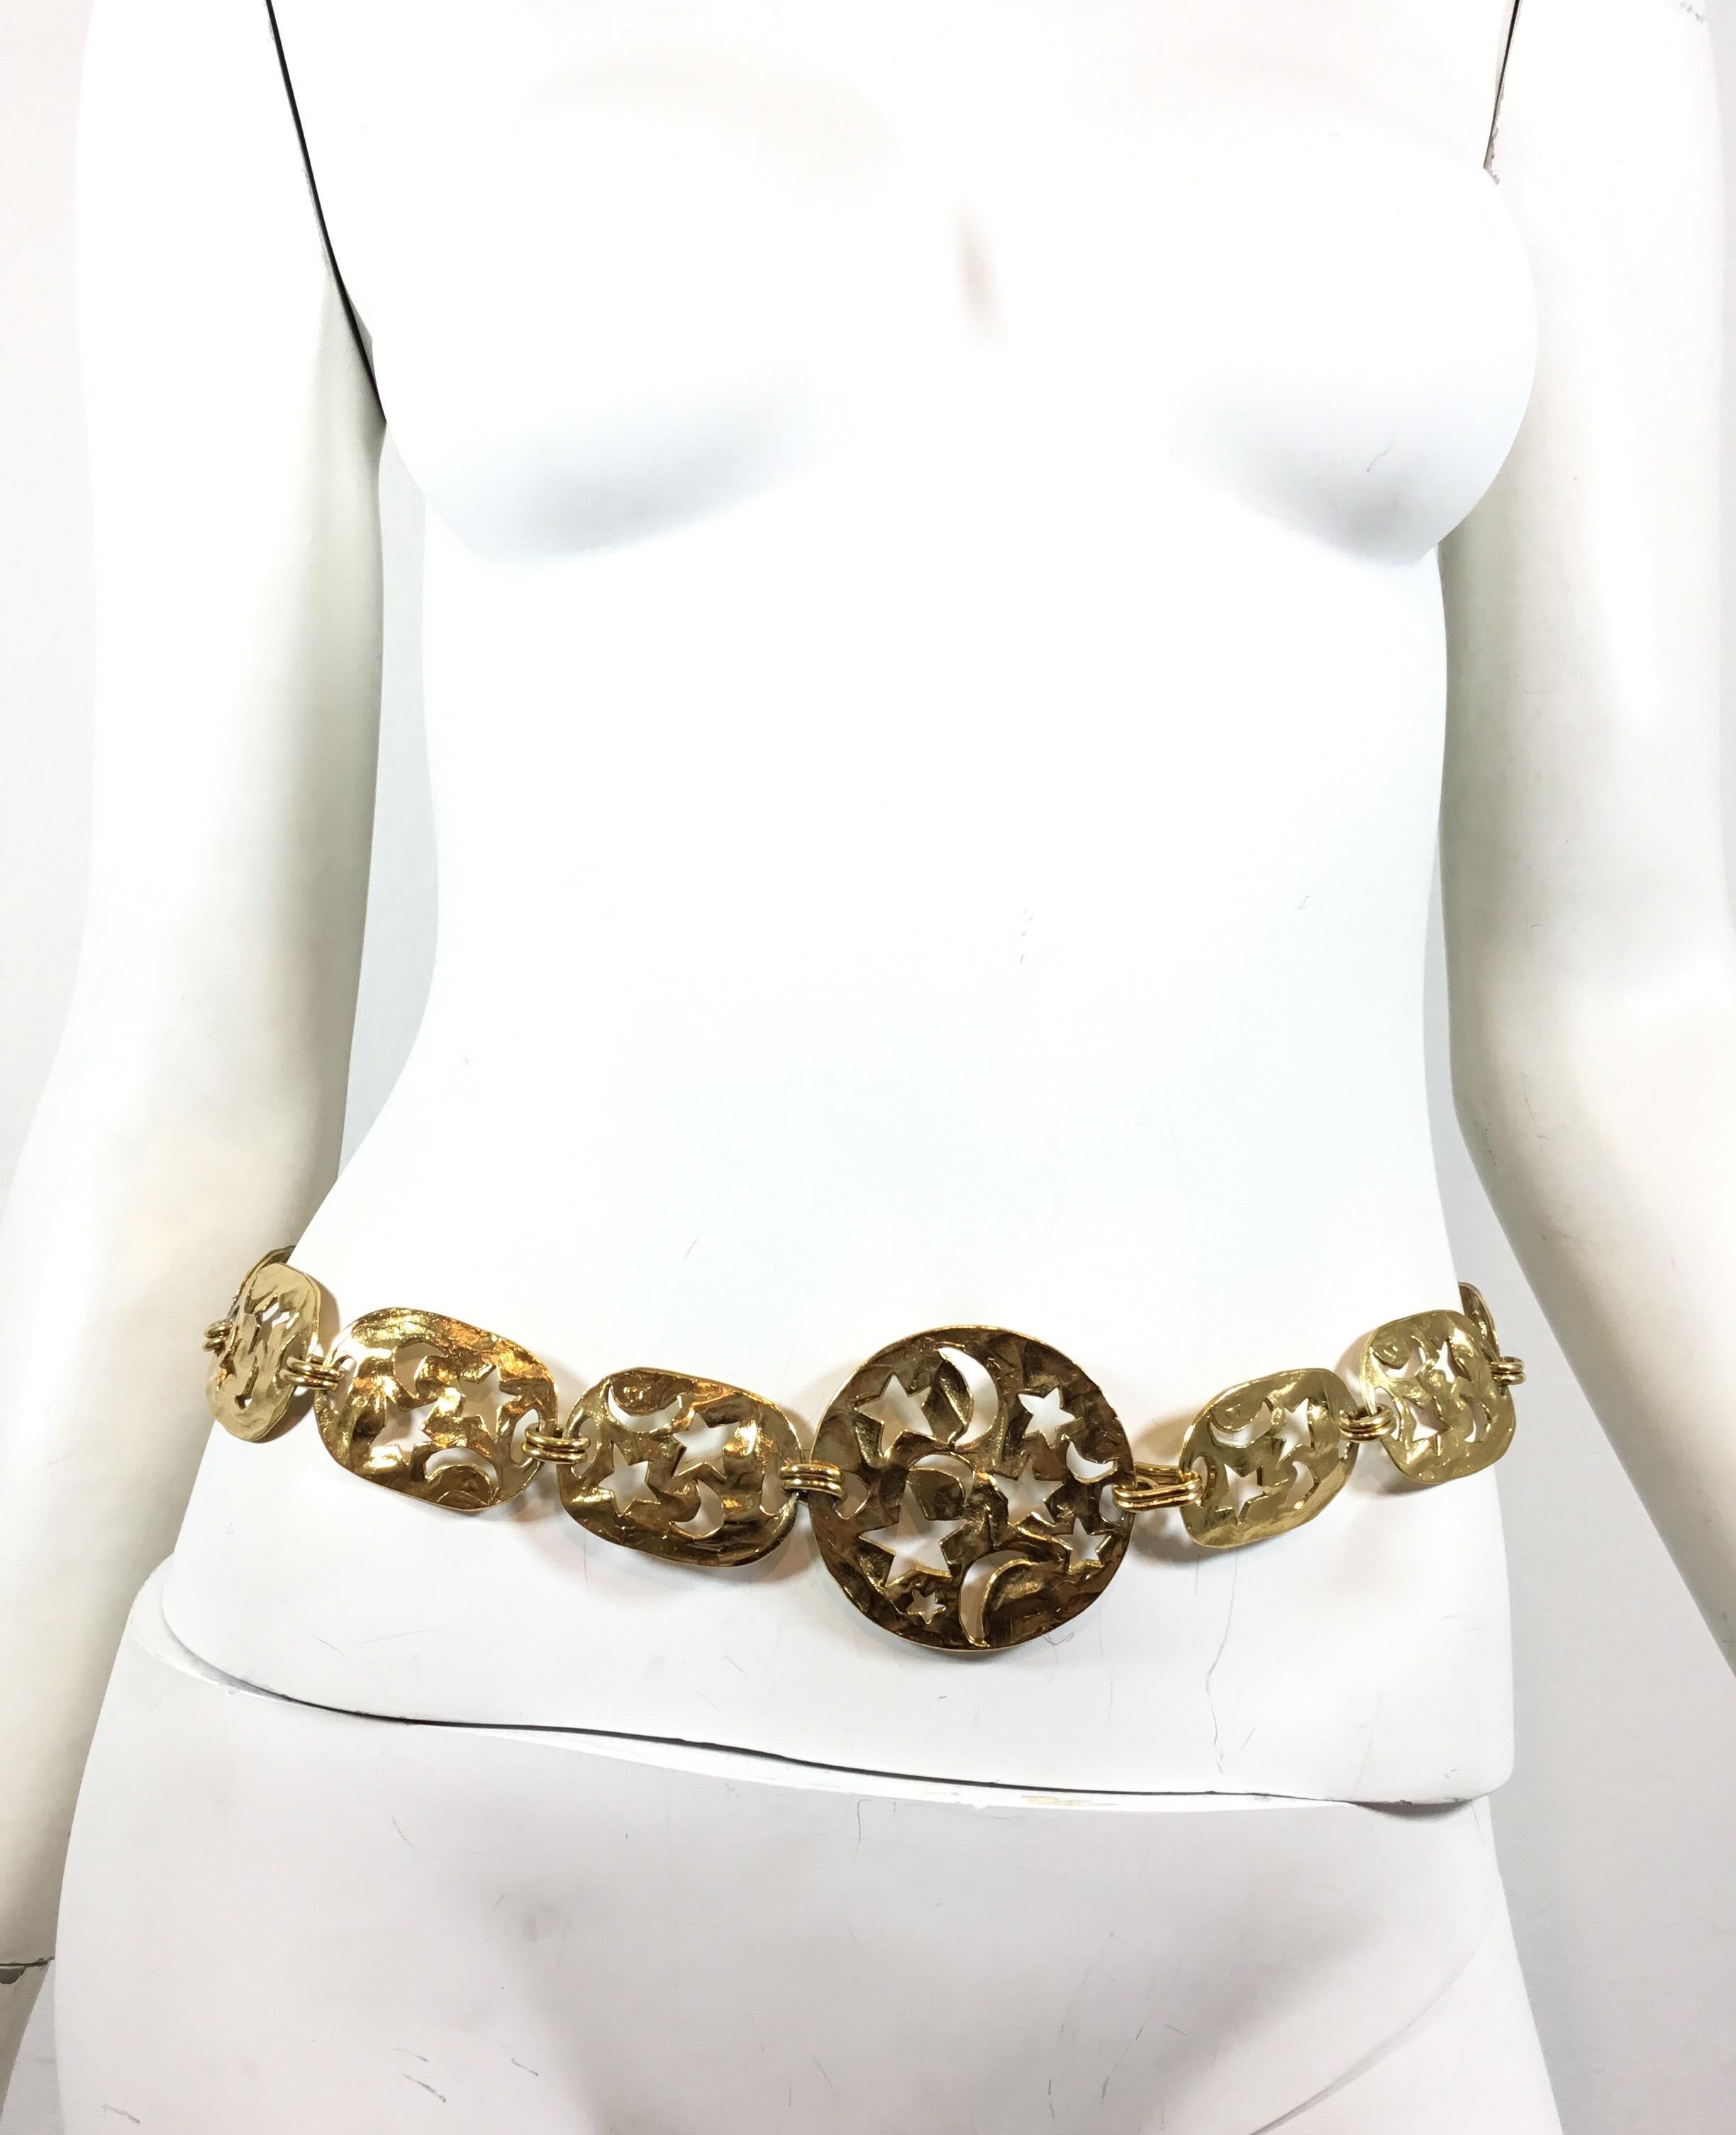 Yves Saint Laurent Gold chain belt with cutout stars and moons throughout. Belt measures approximately 29” Long, plates are 1.5 inches wide with the largest being 2.5” x 2.5”. Hook closure.

Excellent condition!